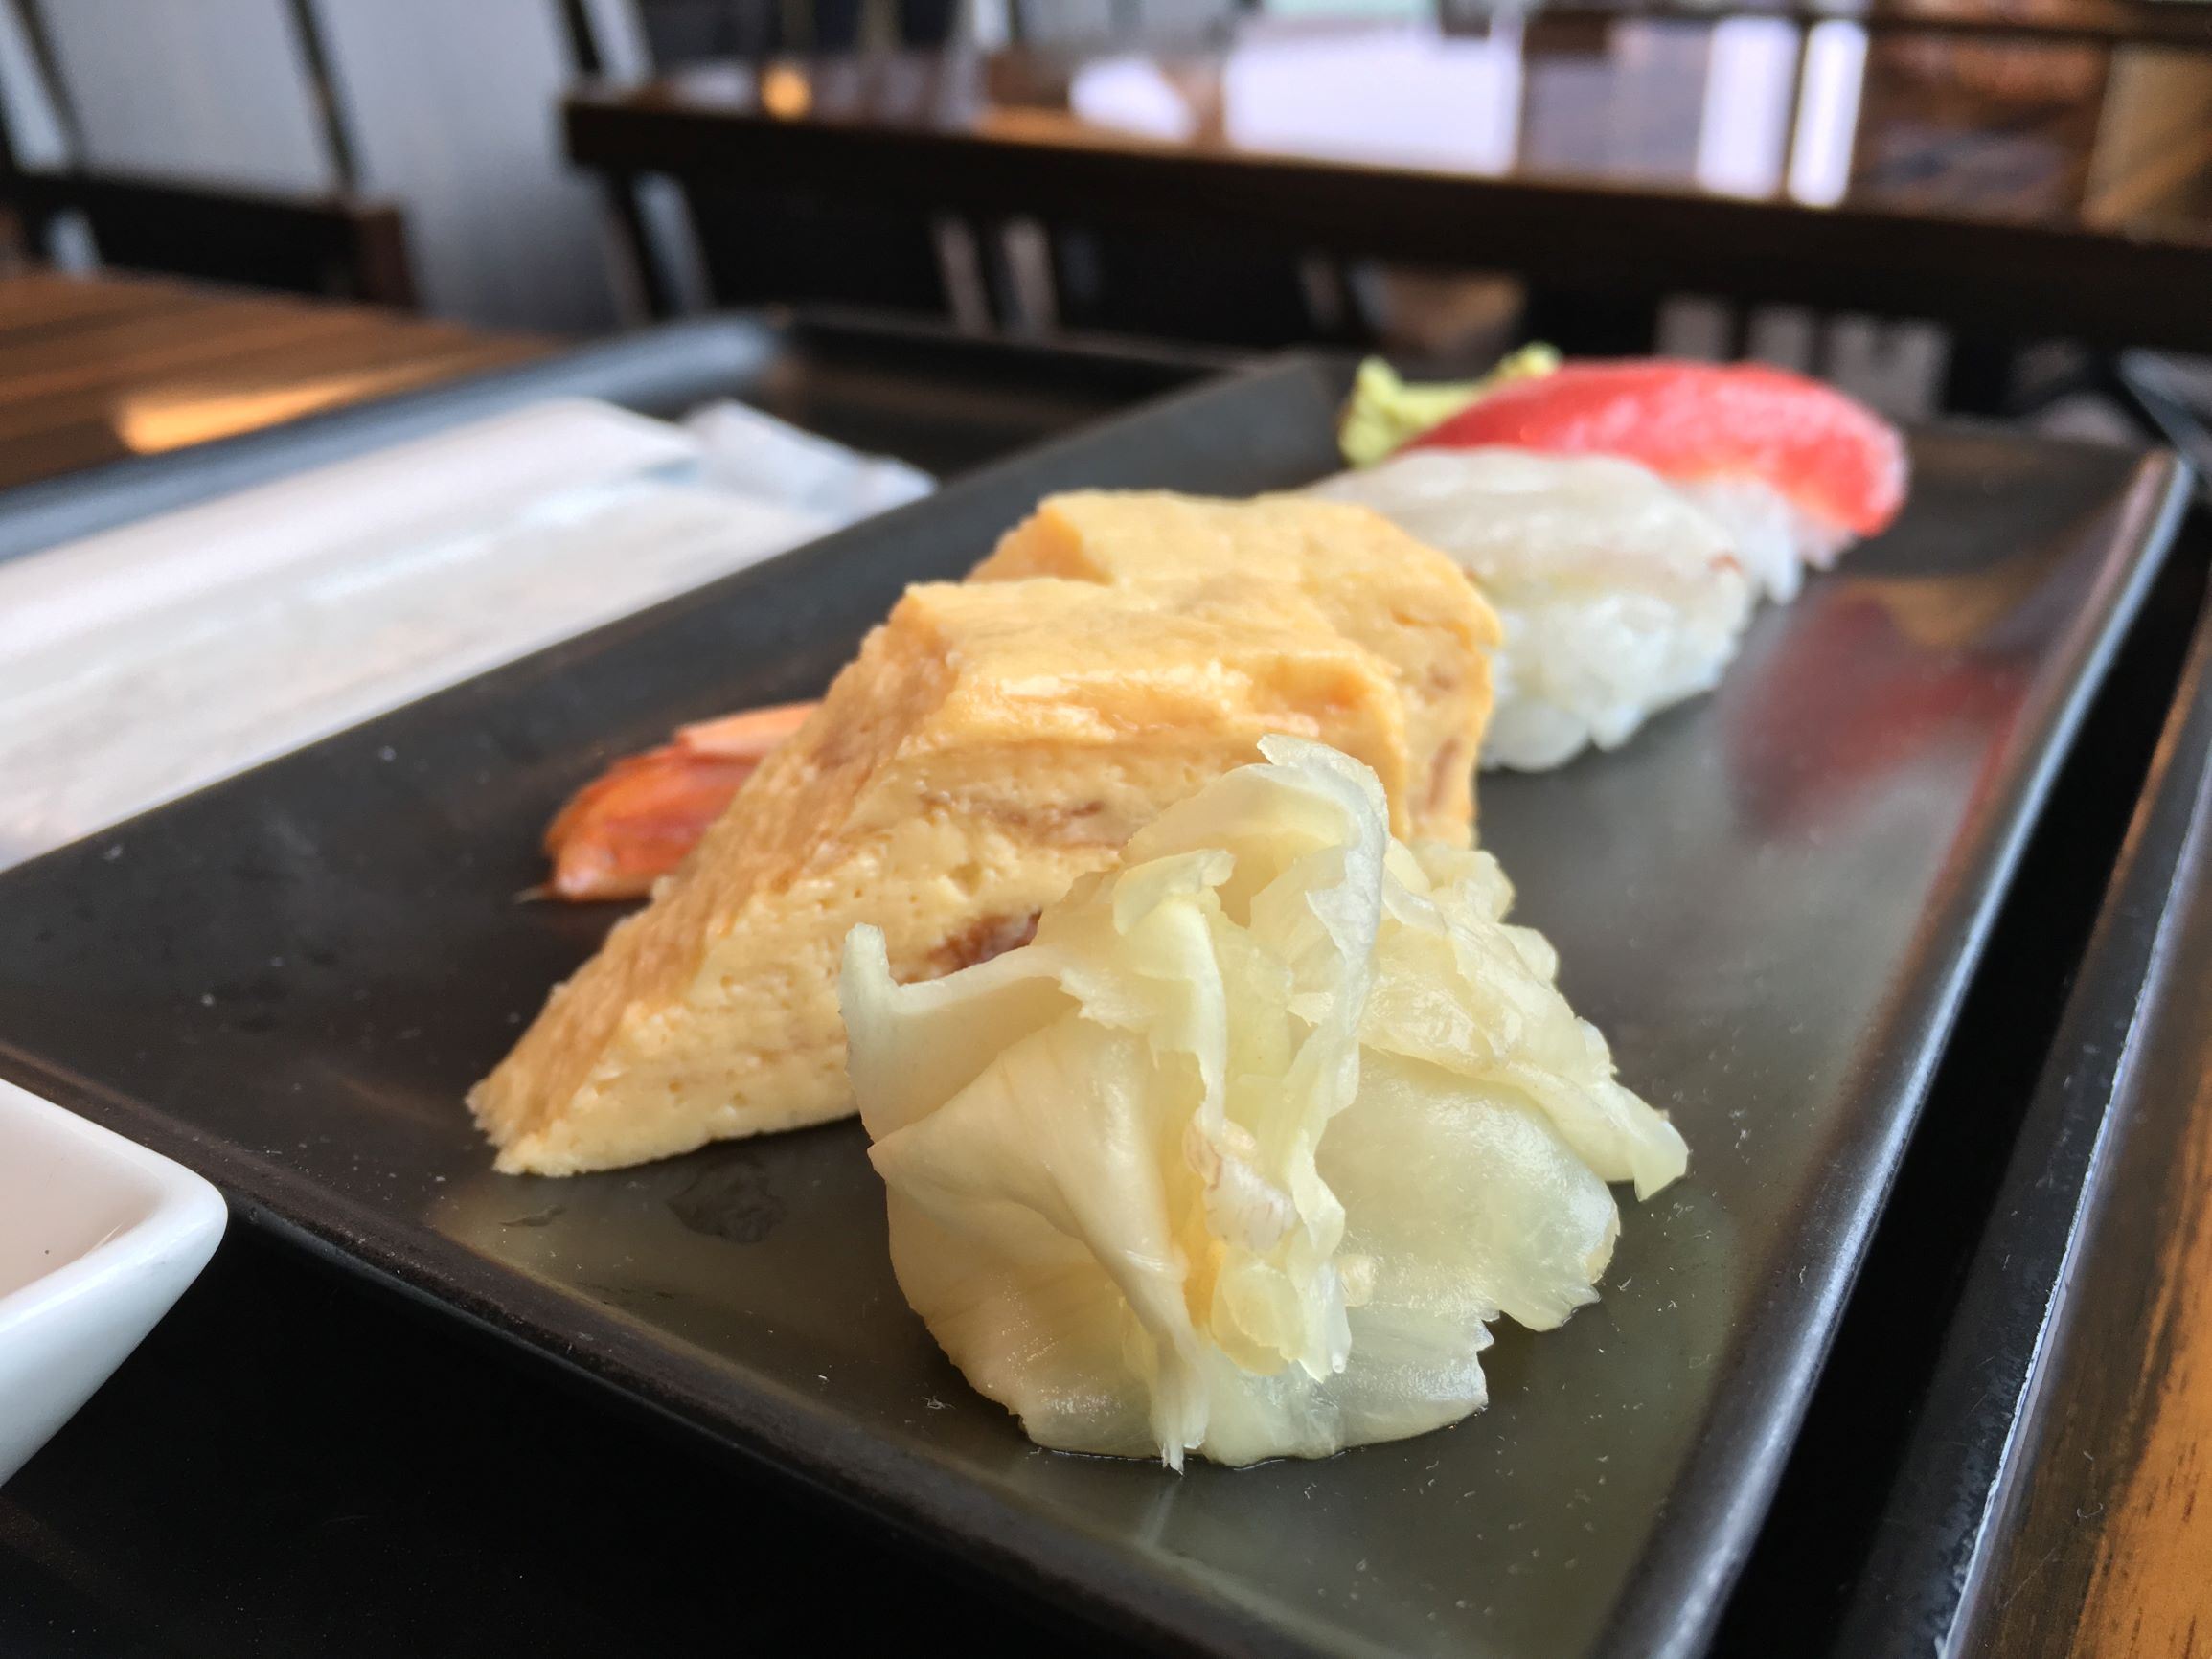 Japan Airlines First Class Lounge made-to-order sushi